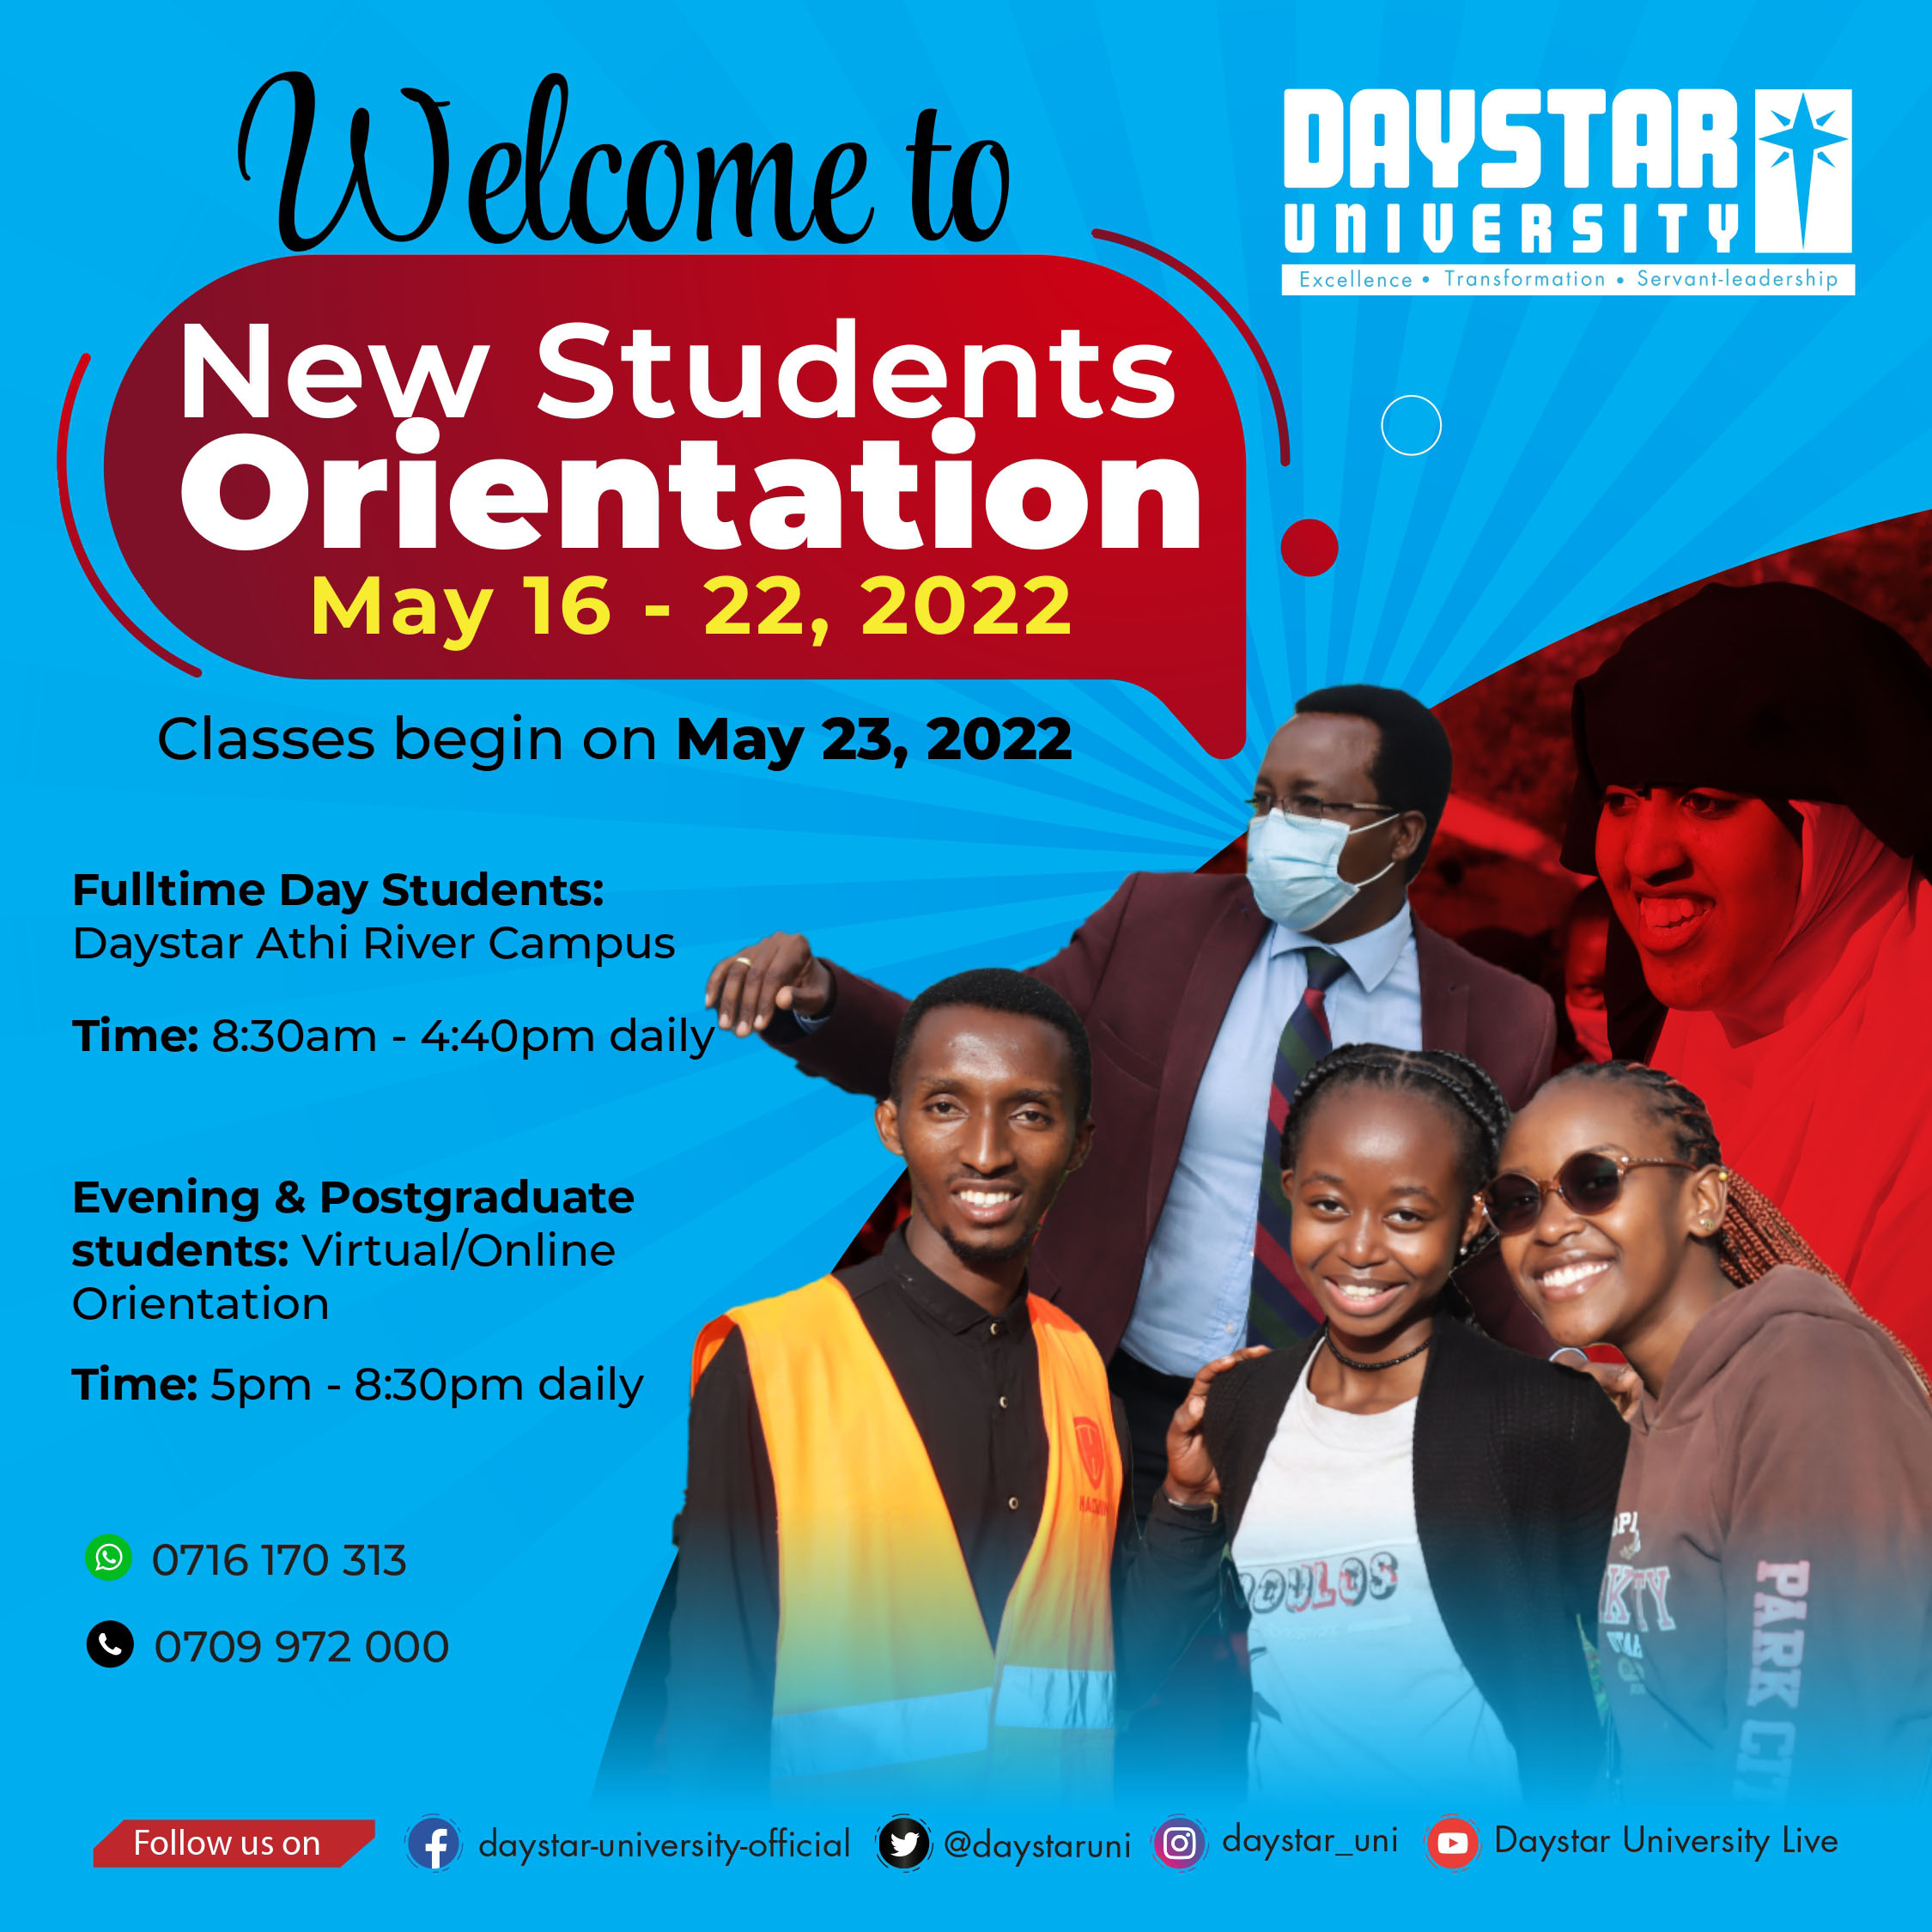 New Students Orientation - May 16 -22, 2022